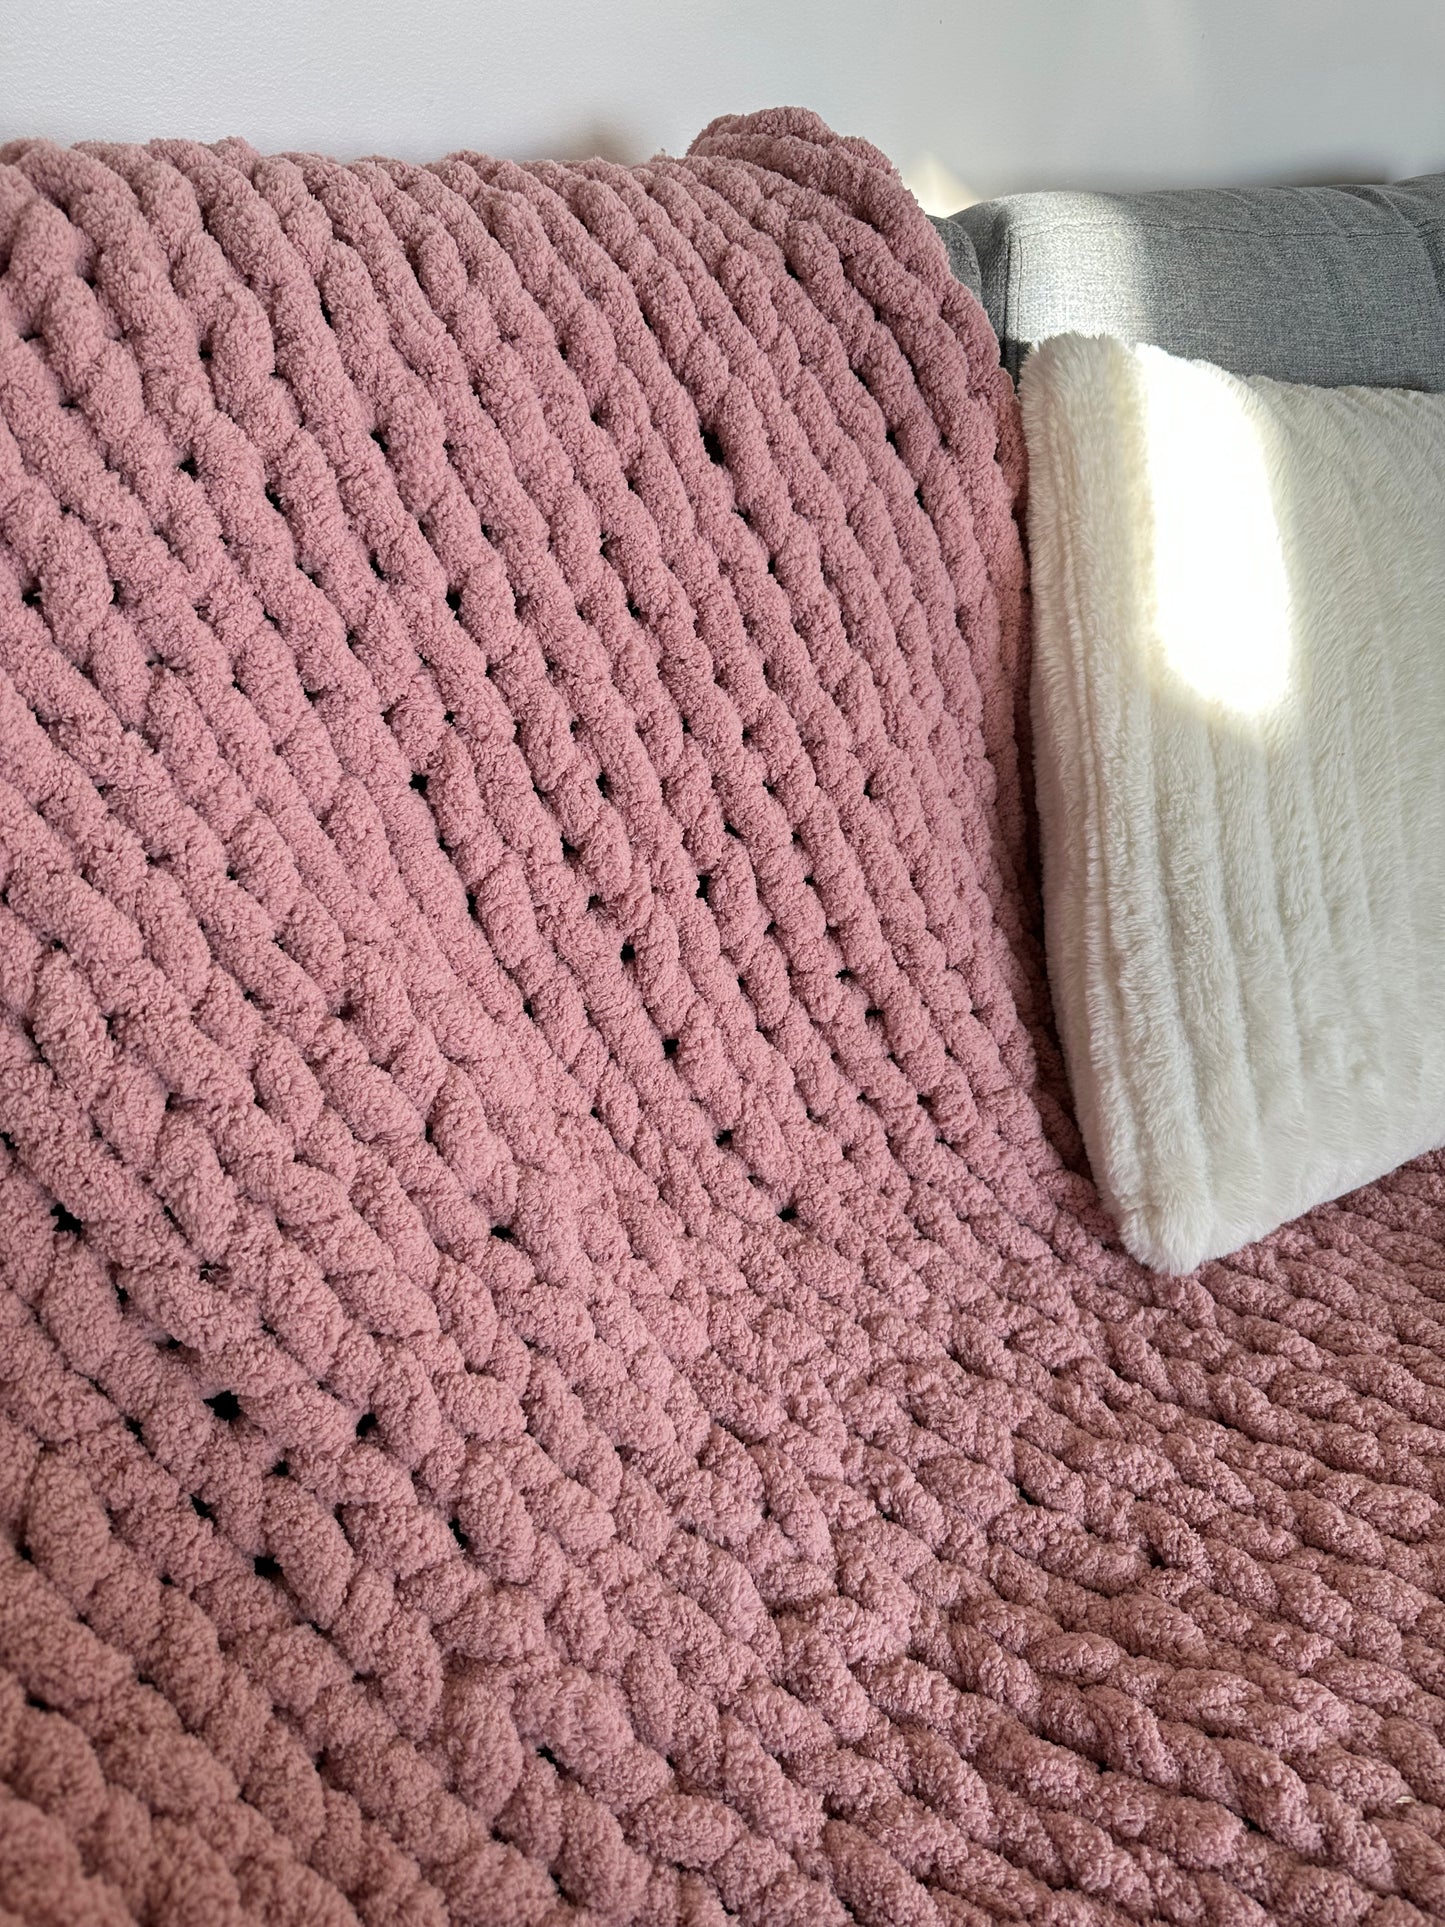 Chunky Knit Blanket - Pink